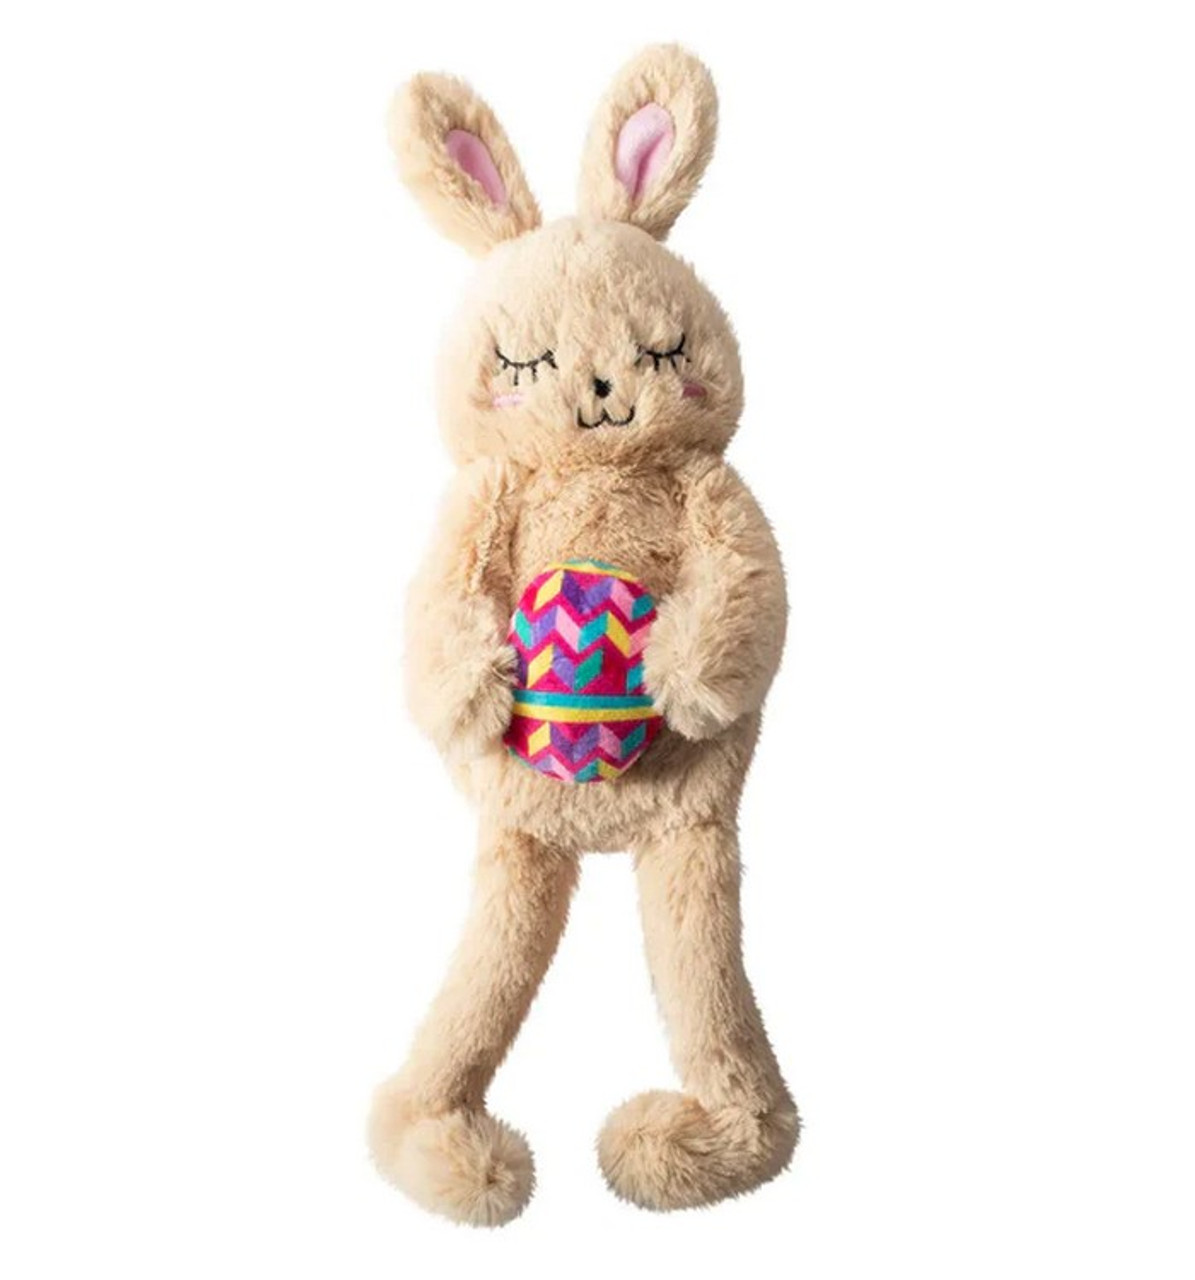 https://cdn11.bigcommerce.com/s-99vj2qx/images/stencil/1280x1280/products/26965/98178/hop-to-it-bunny-toy-fringe__68176.1679768292.jpg?c=2